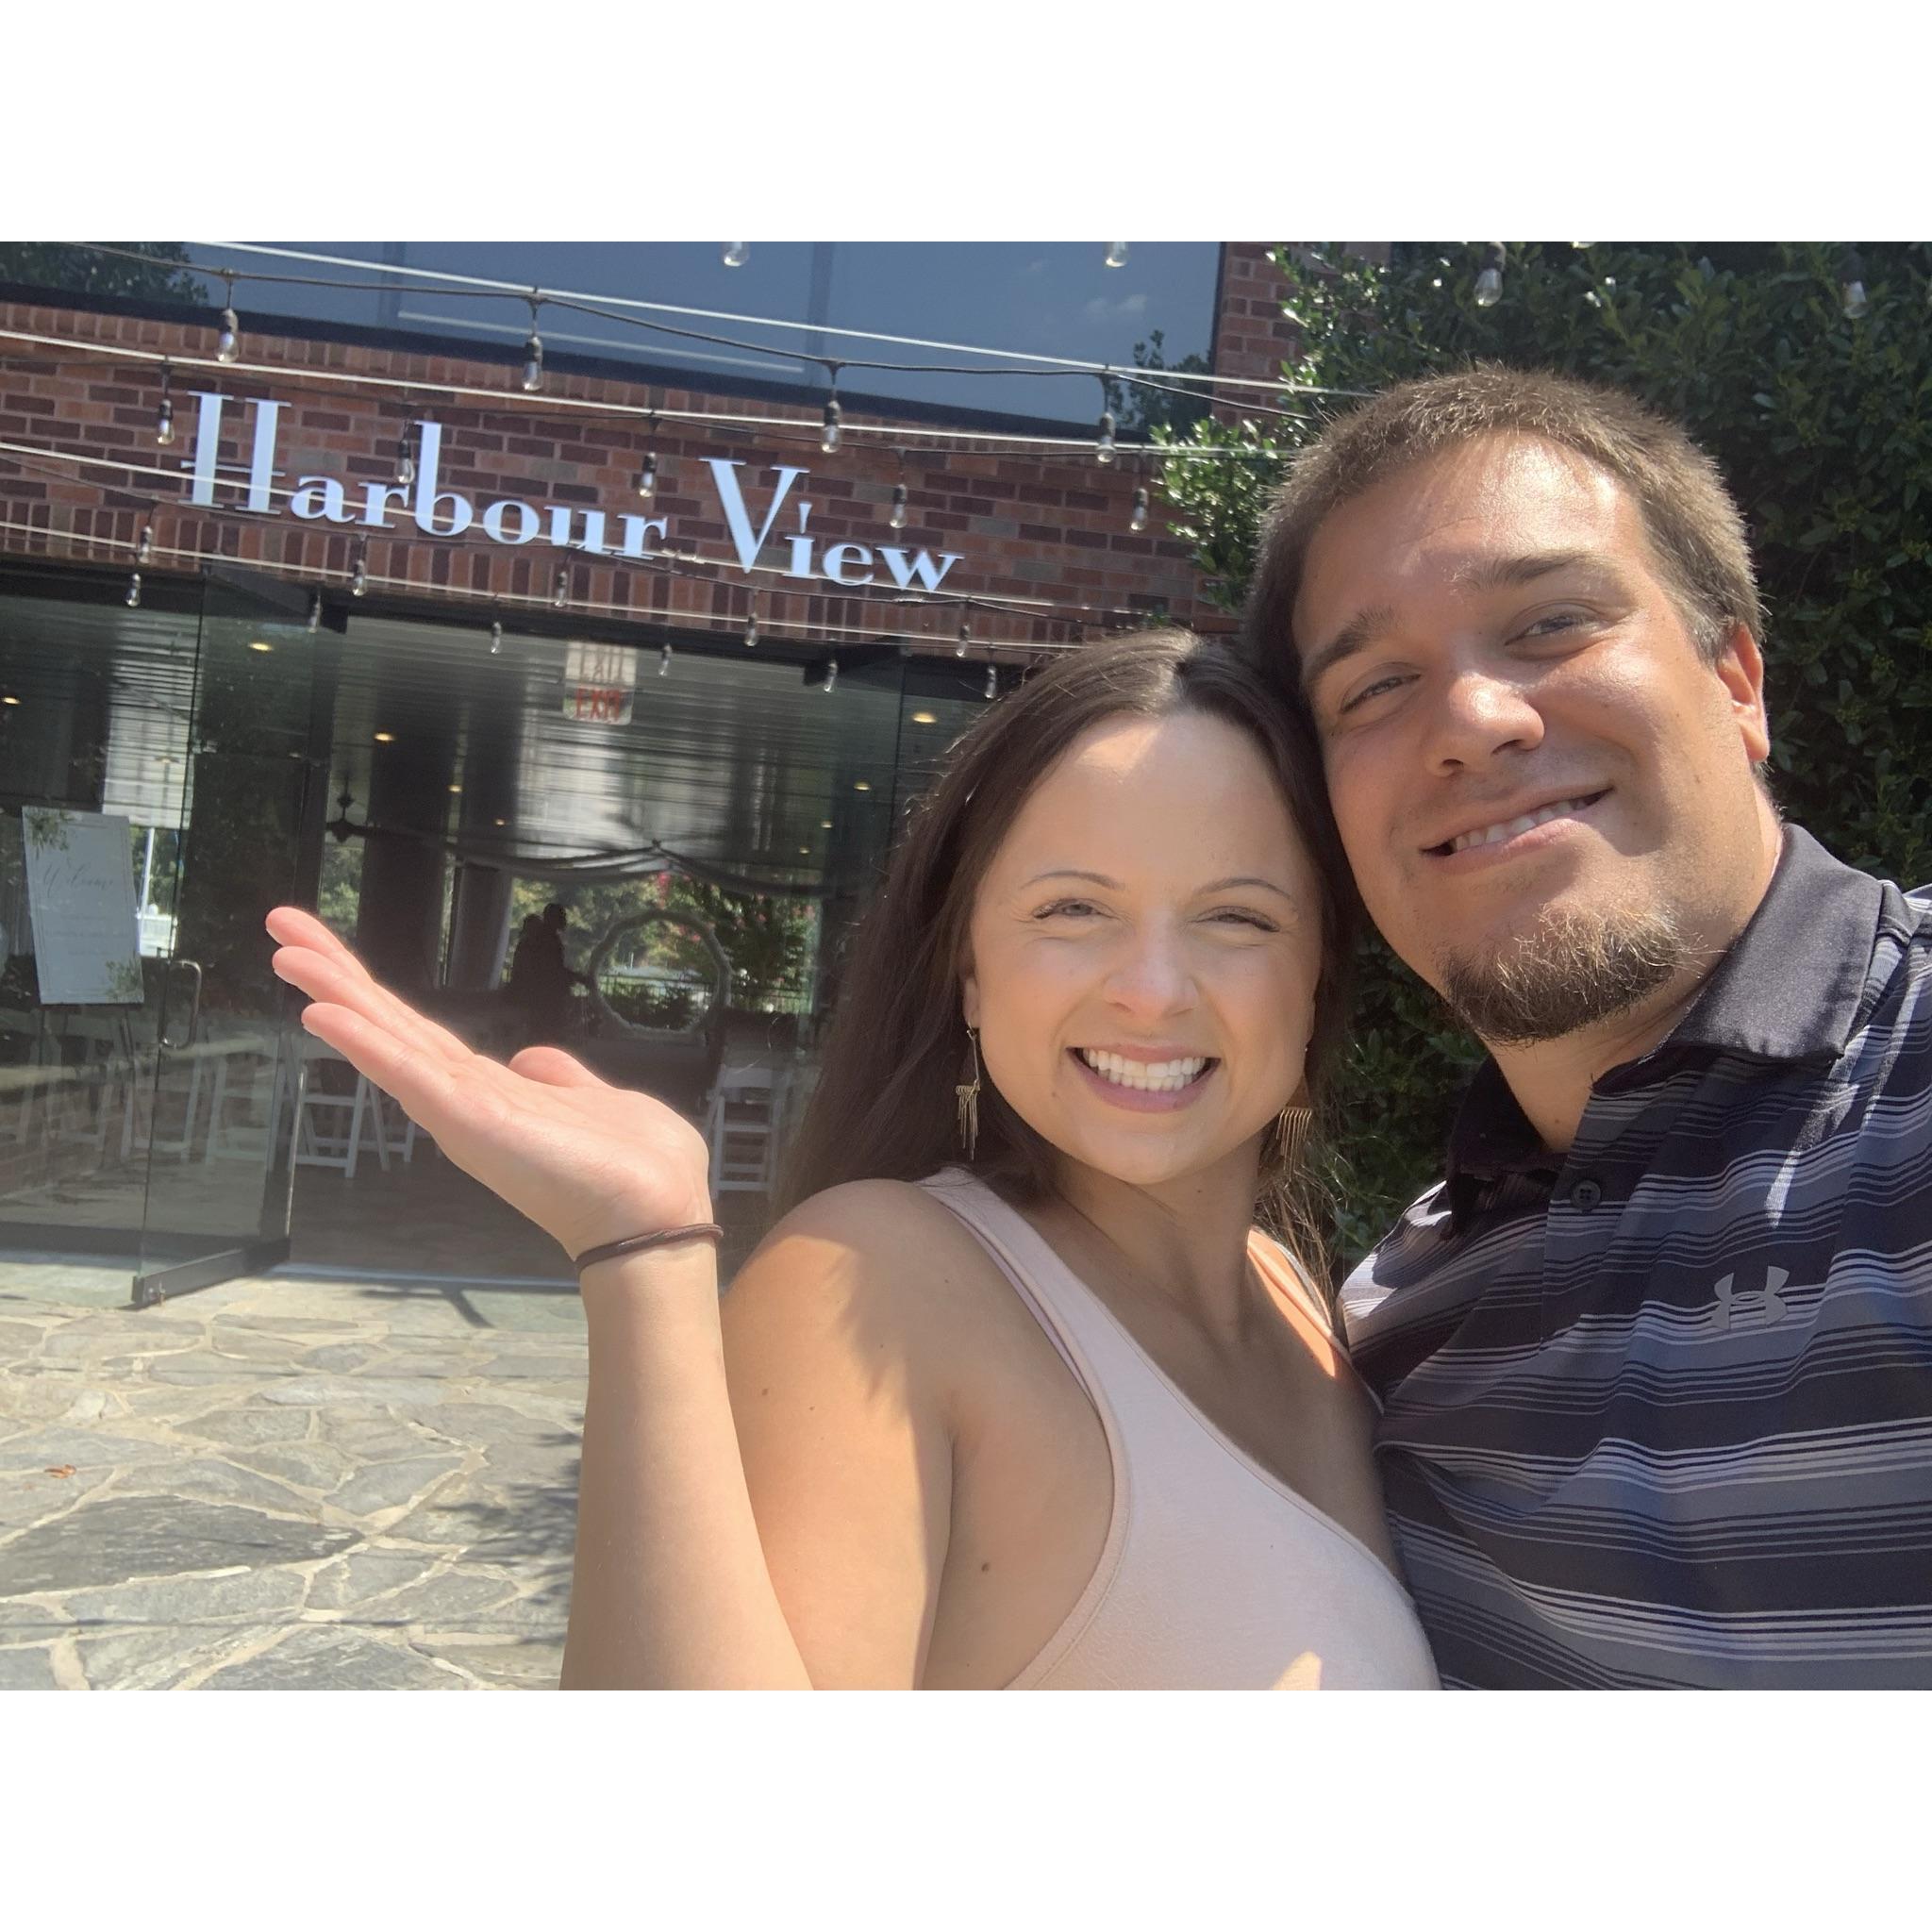 The day we signed our wedding venue! Fun fact: we knew we wanted this location but wanted to enjoy the venue shopping experience. After all, this was our second location, and we signed right away